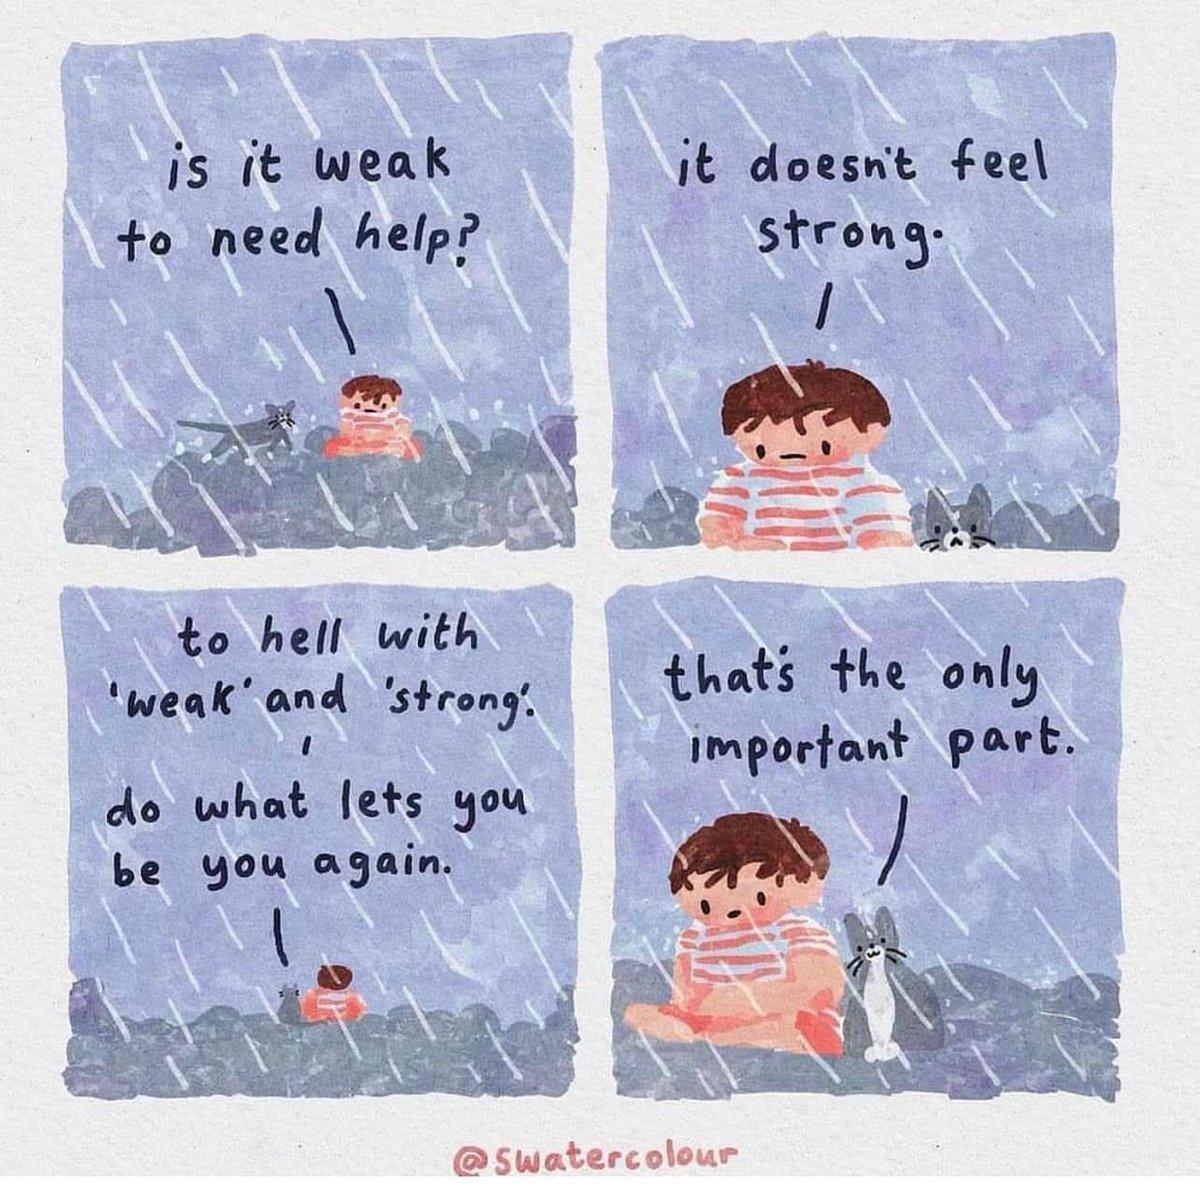 Struggling with something? Don't hesitate to ask for help #Support #AskForHelp